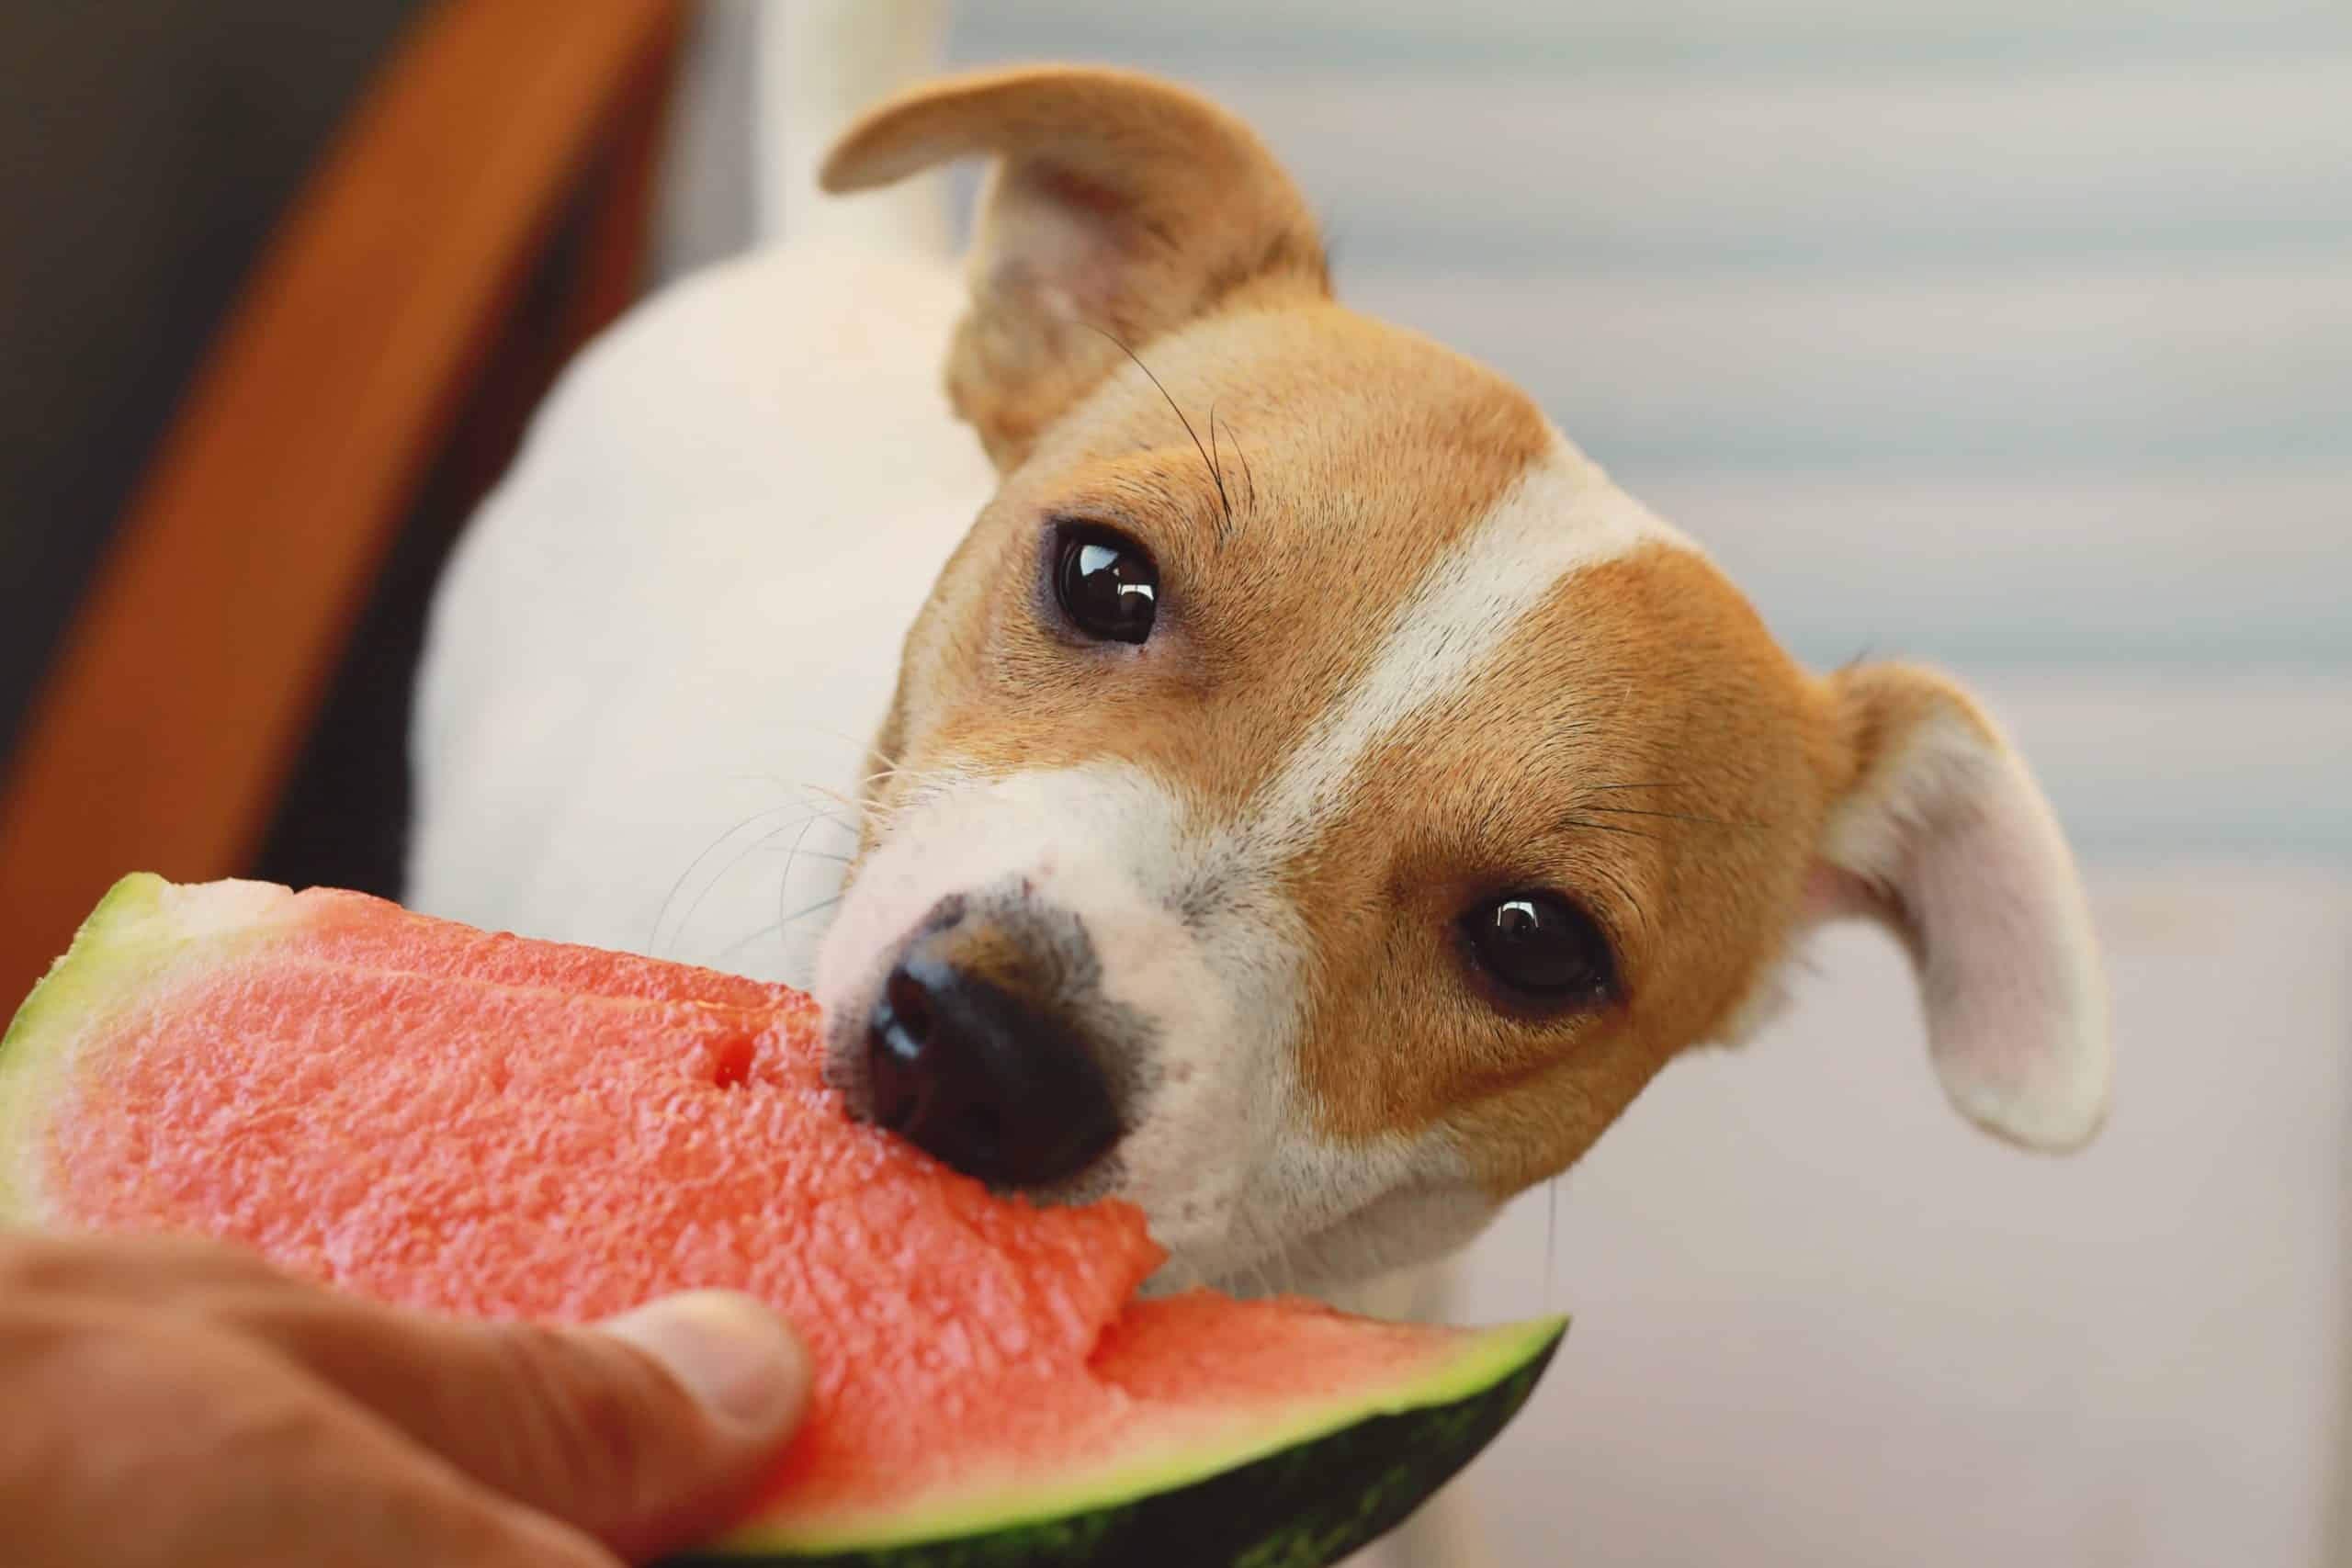 Jack Russell terrier eats seedless watermelon. Watermelon helps your dog's liver process the ammonia produced by digesting protein, which eases kidney strain and helps eliminate excess fluids.